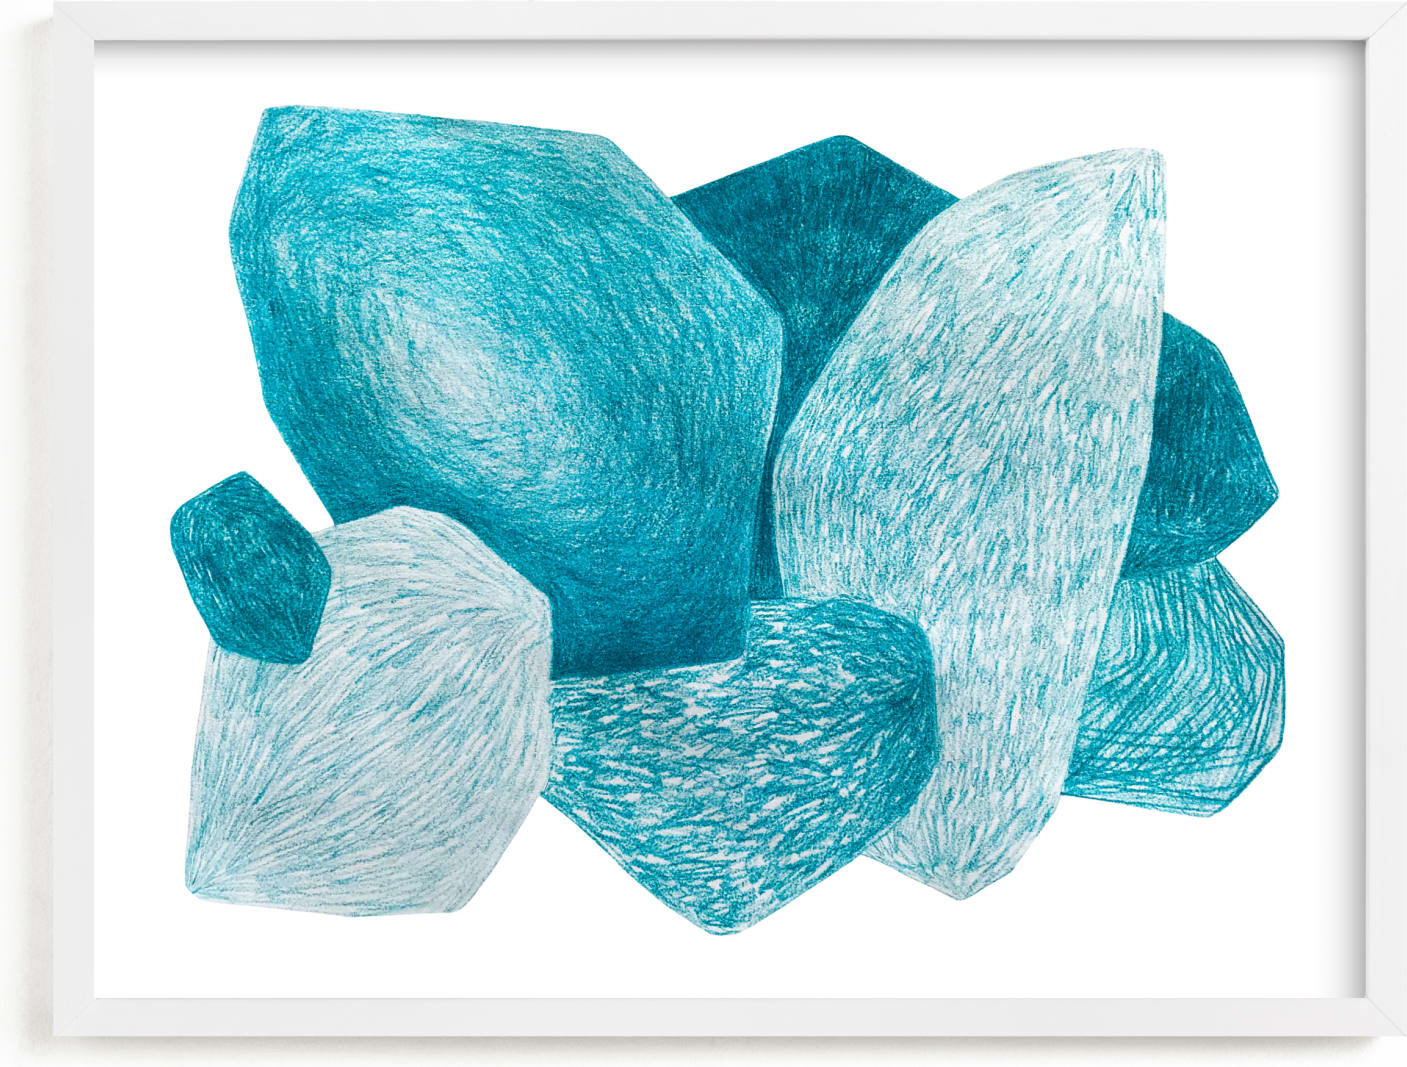 This is a blue art by Emily Kariniemi called Sea stones.